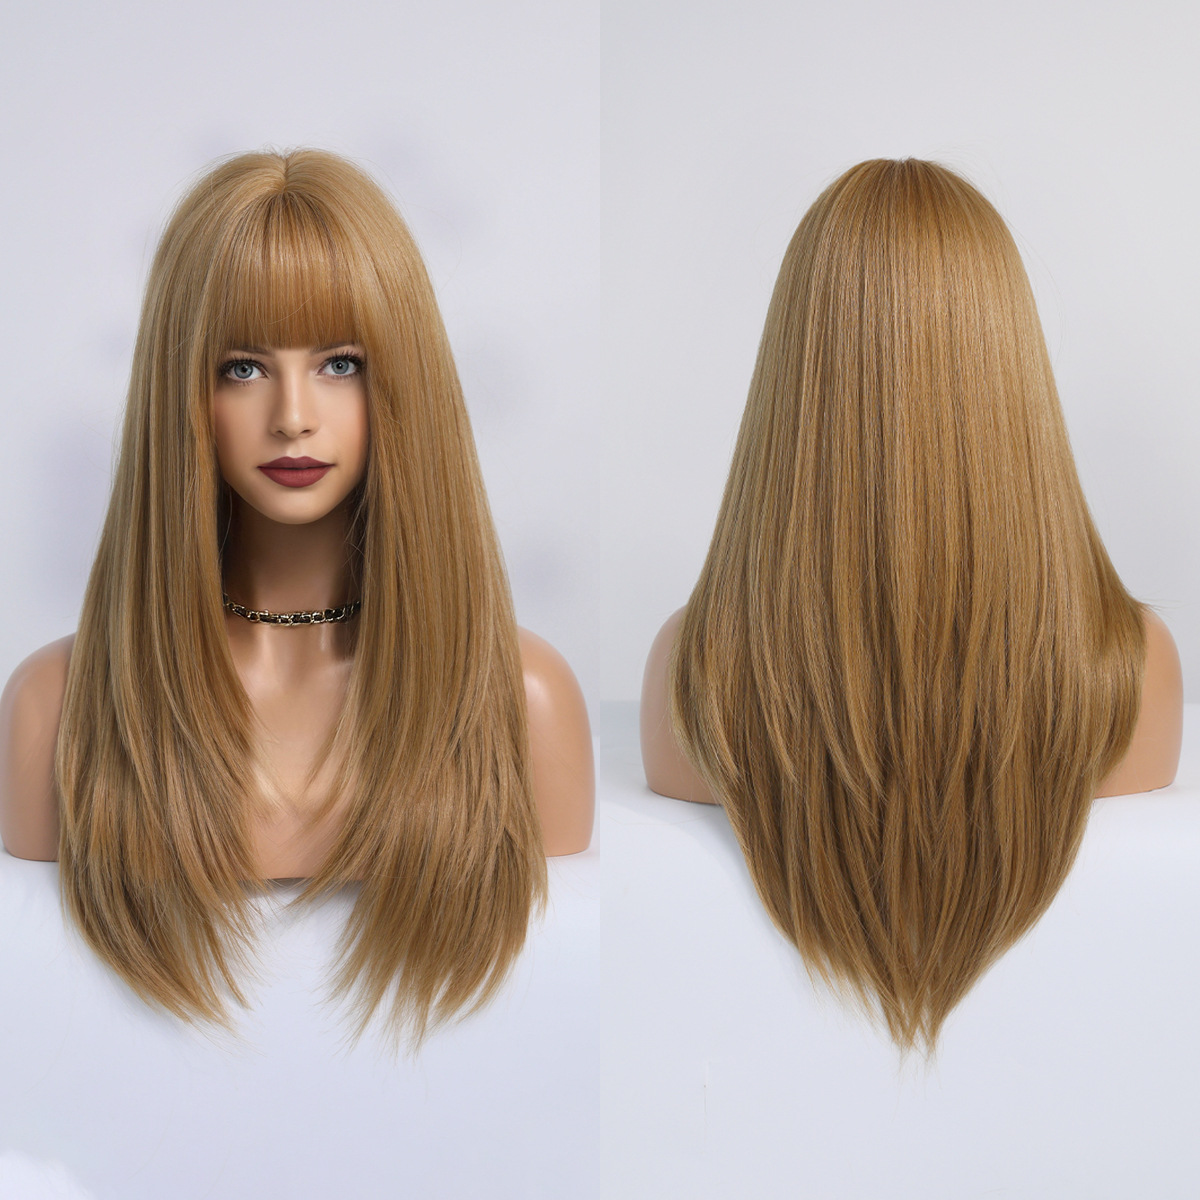 A ready-to-wear synthetic wig with multicolor straight hair and stylish air bangs